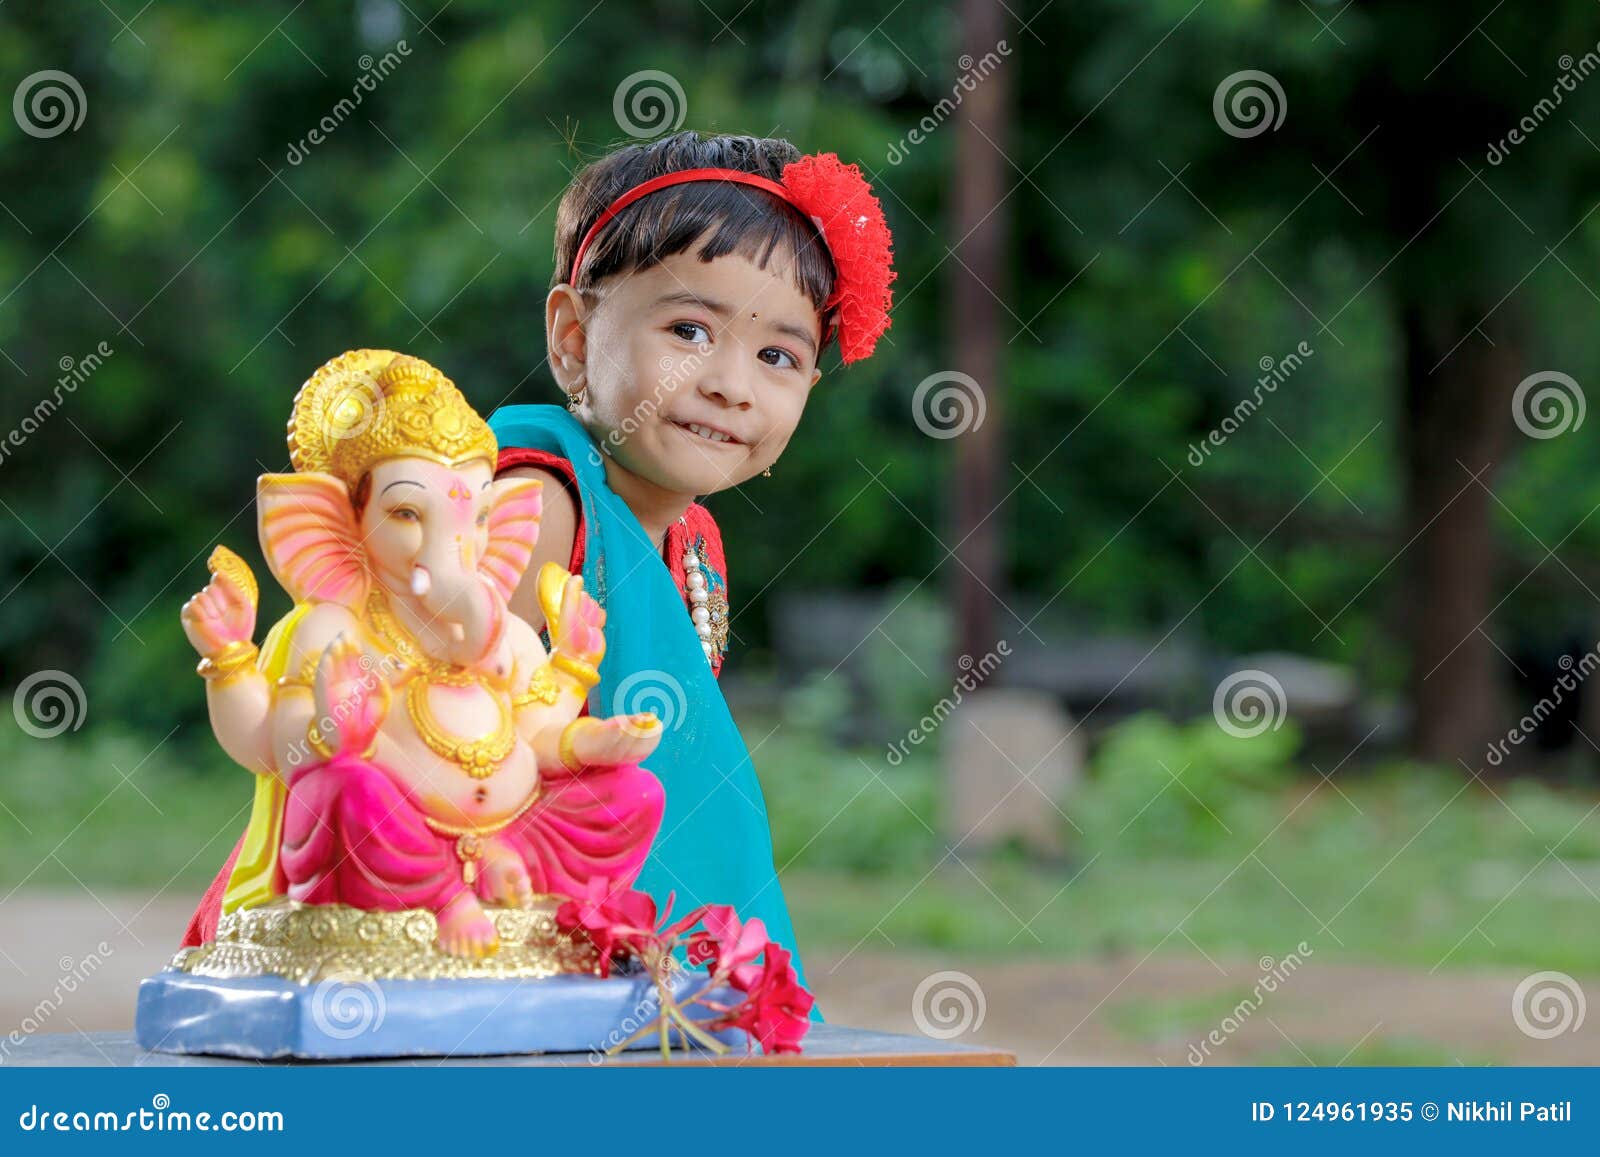 lord ganesh festival in india